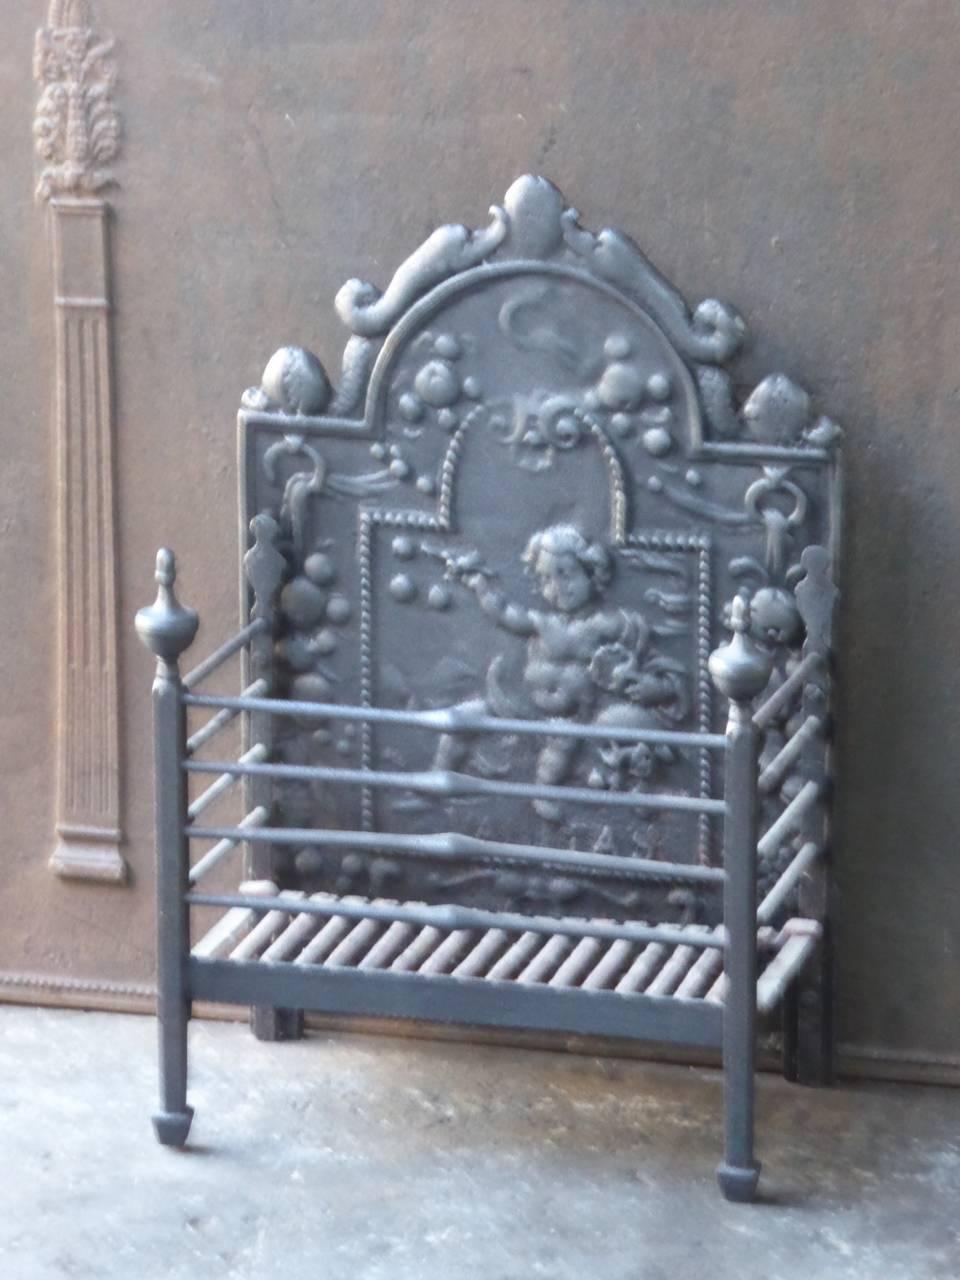 18th-19th century Dutch fireplace grate made of wrought iron and cast iron. The total width at the front of the grate is 56 cm (22.0